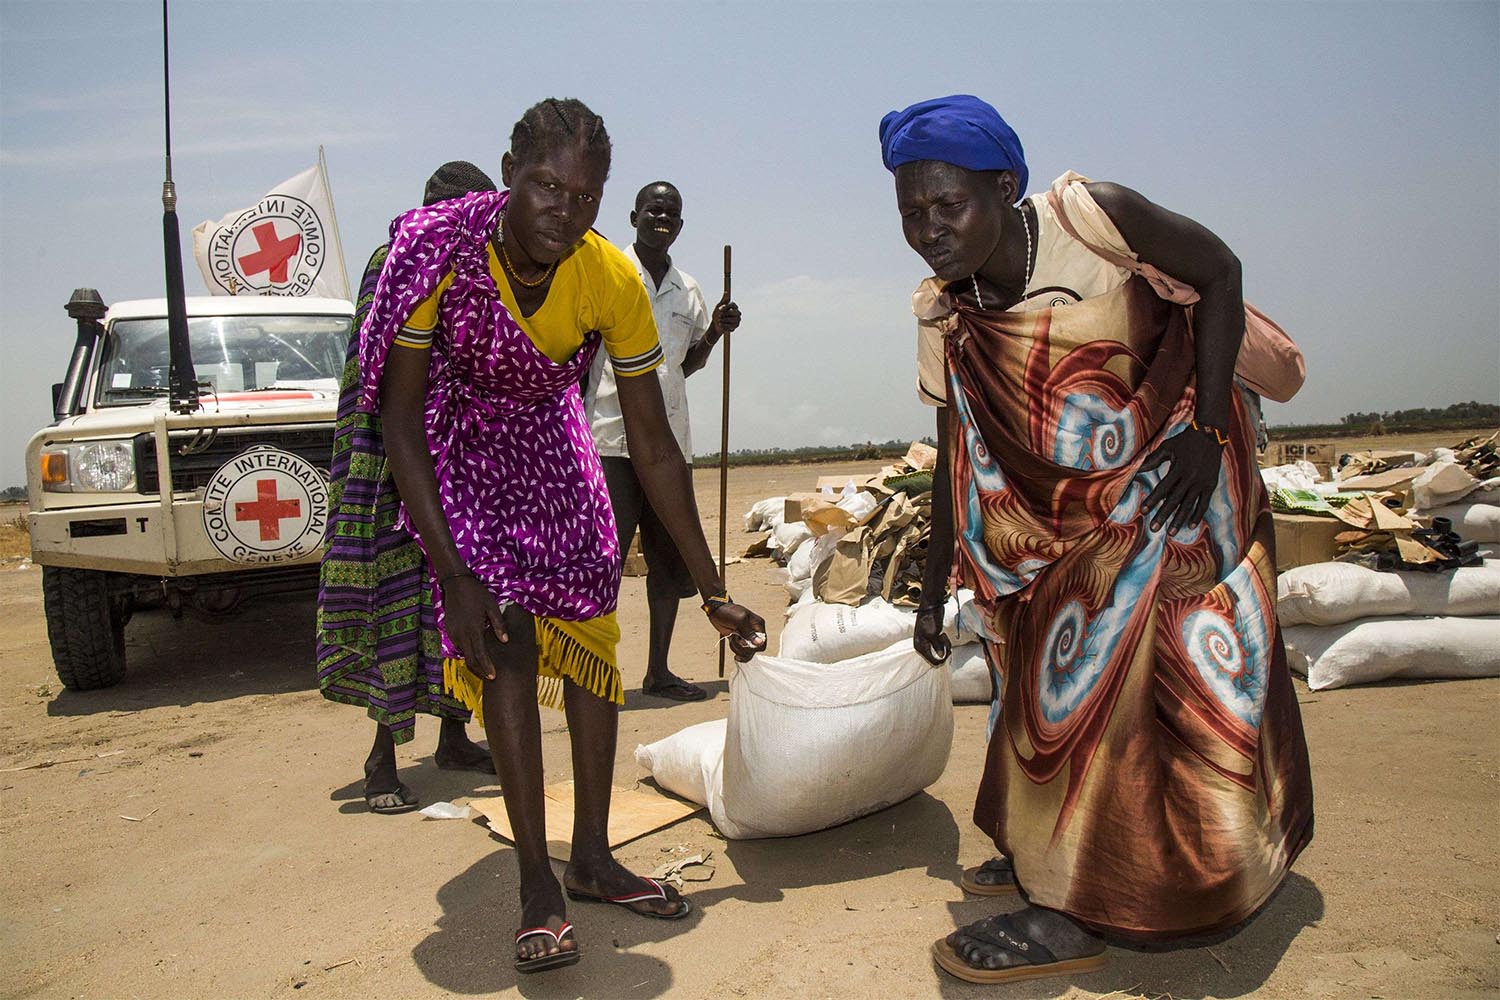 13 million people across the Horn of Africa face severe hunger